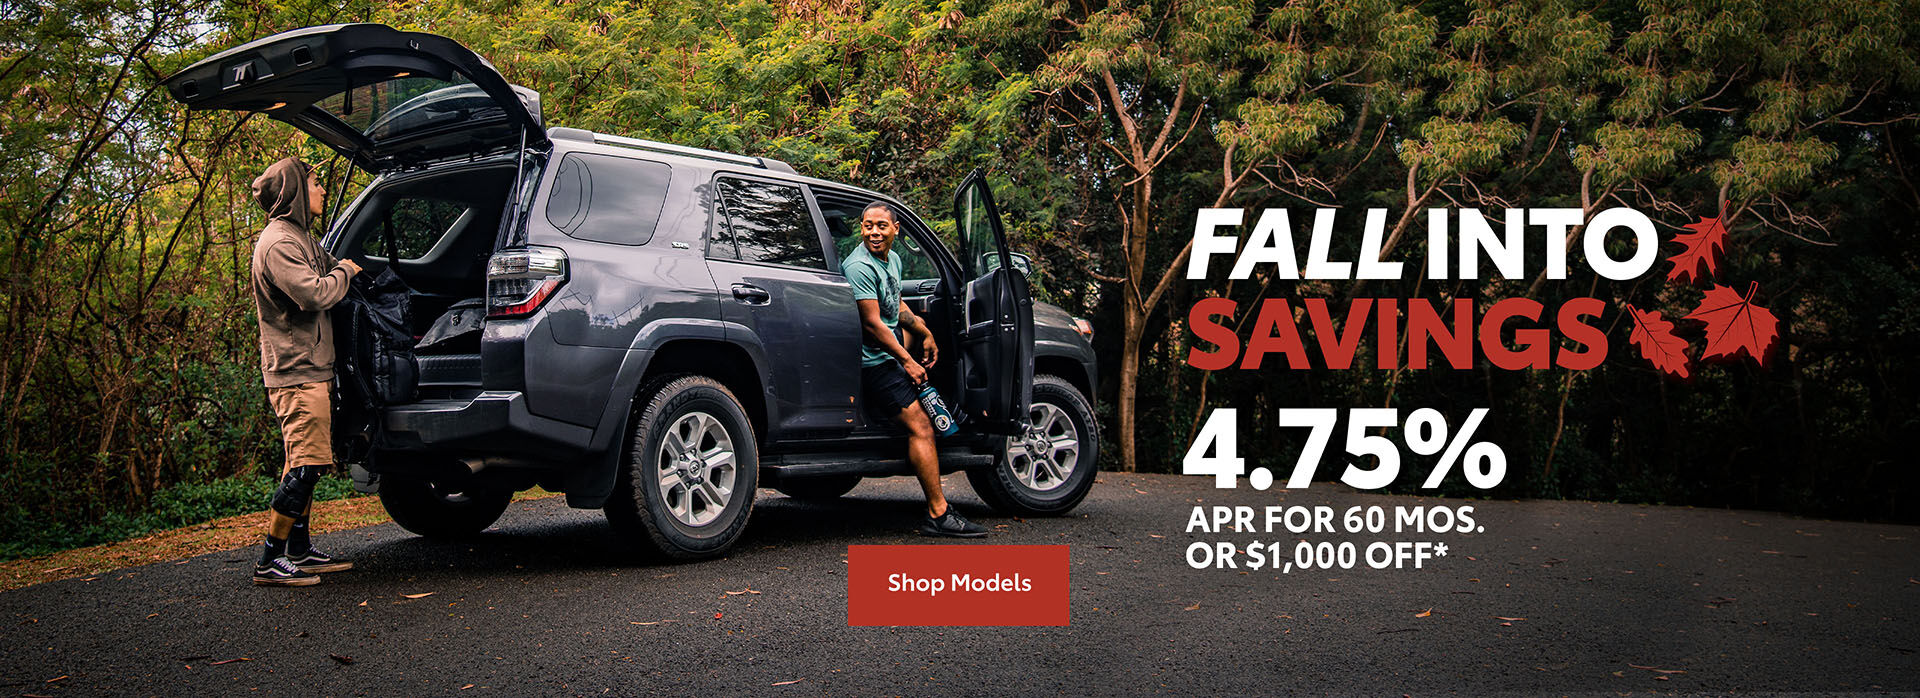 Fall Into Savings - 4.75% APR for 60 Months or $1,000 Off*